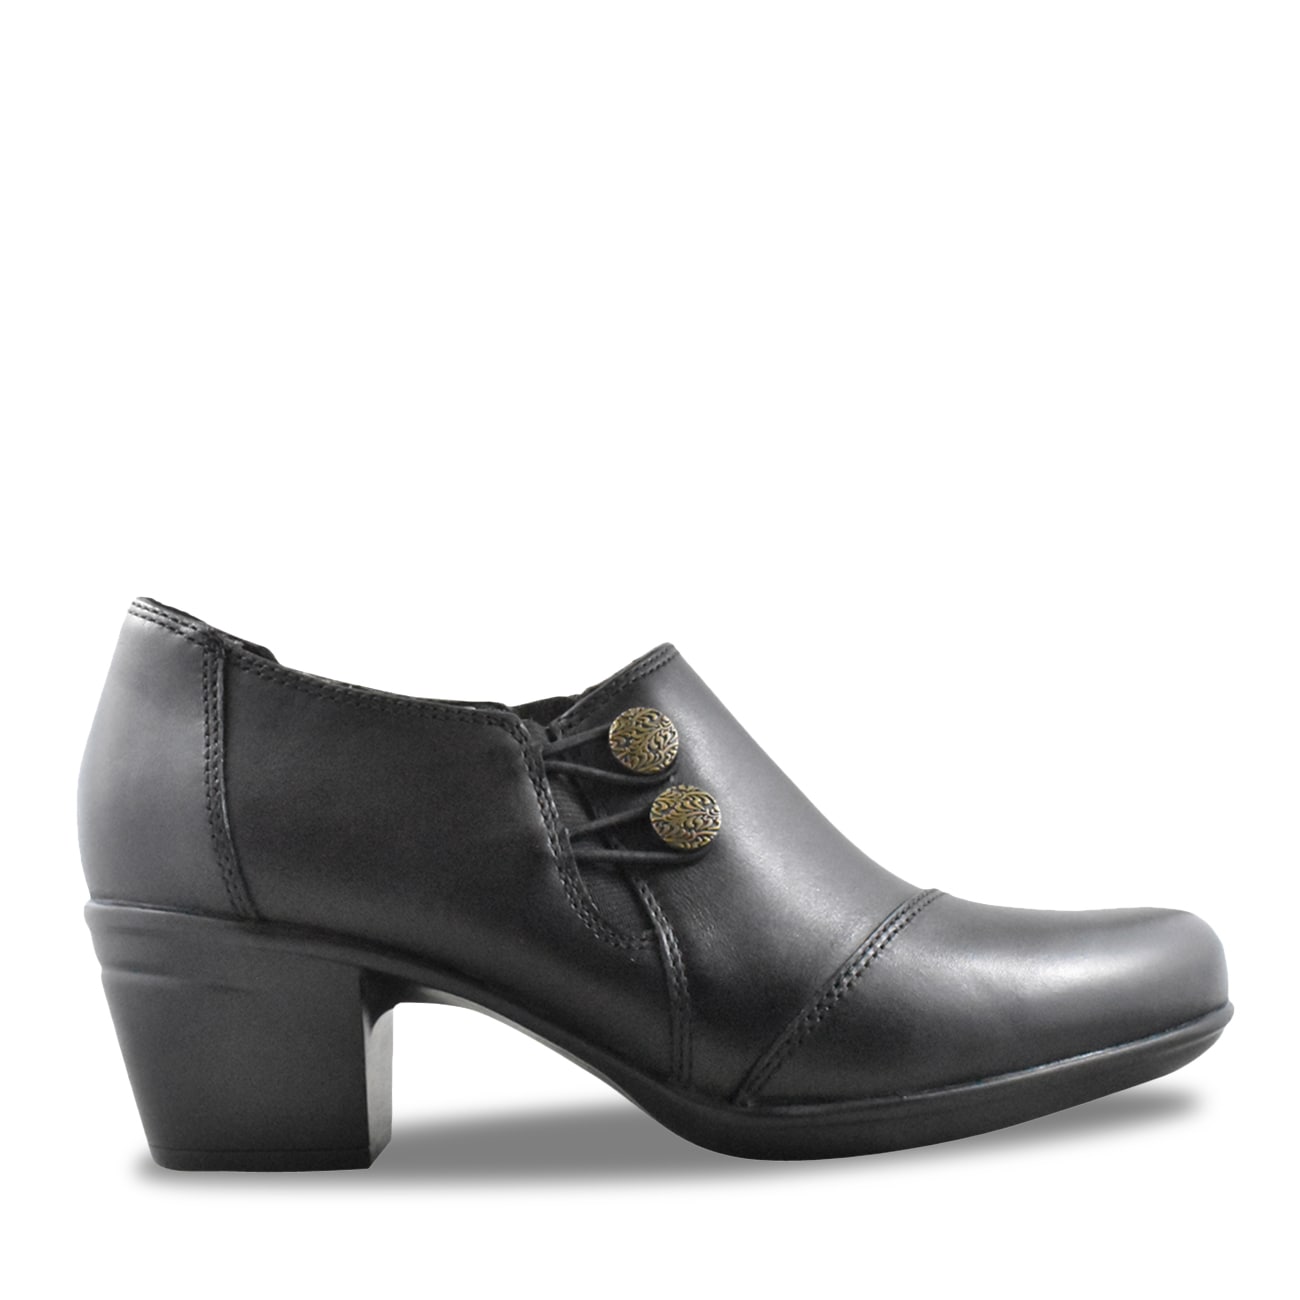 clarks work shoes sale